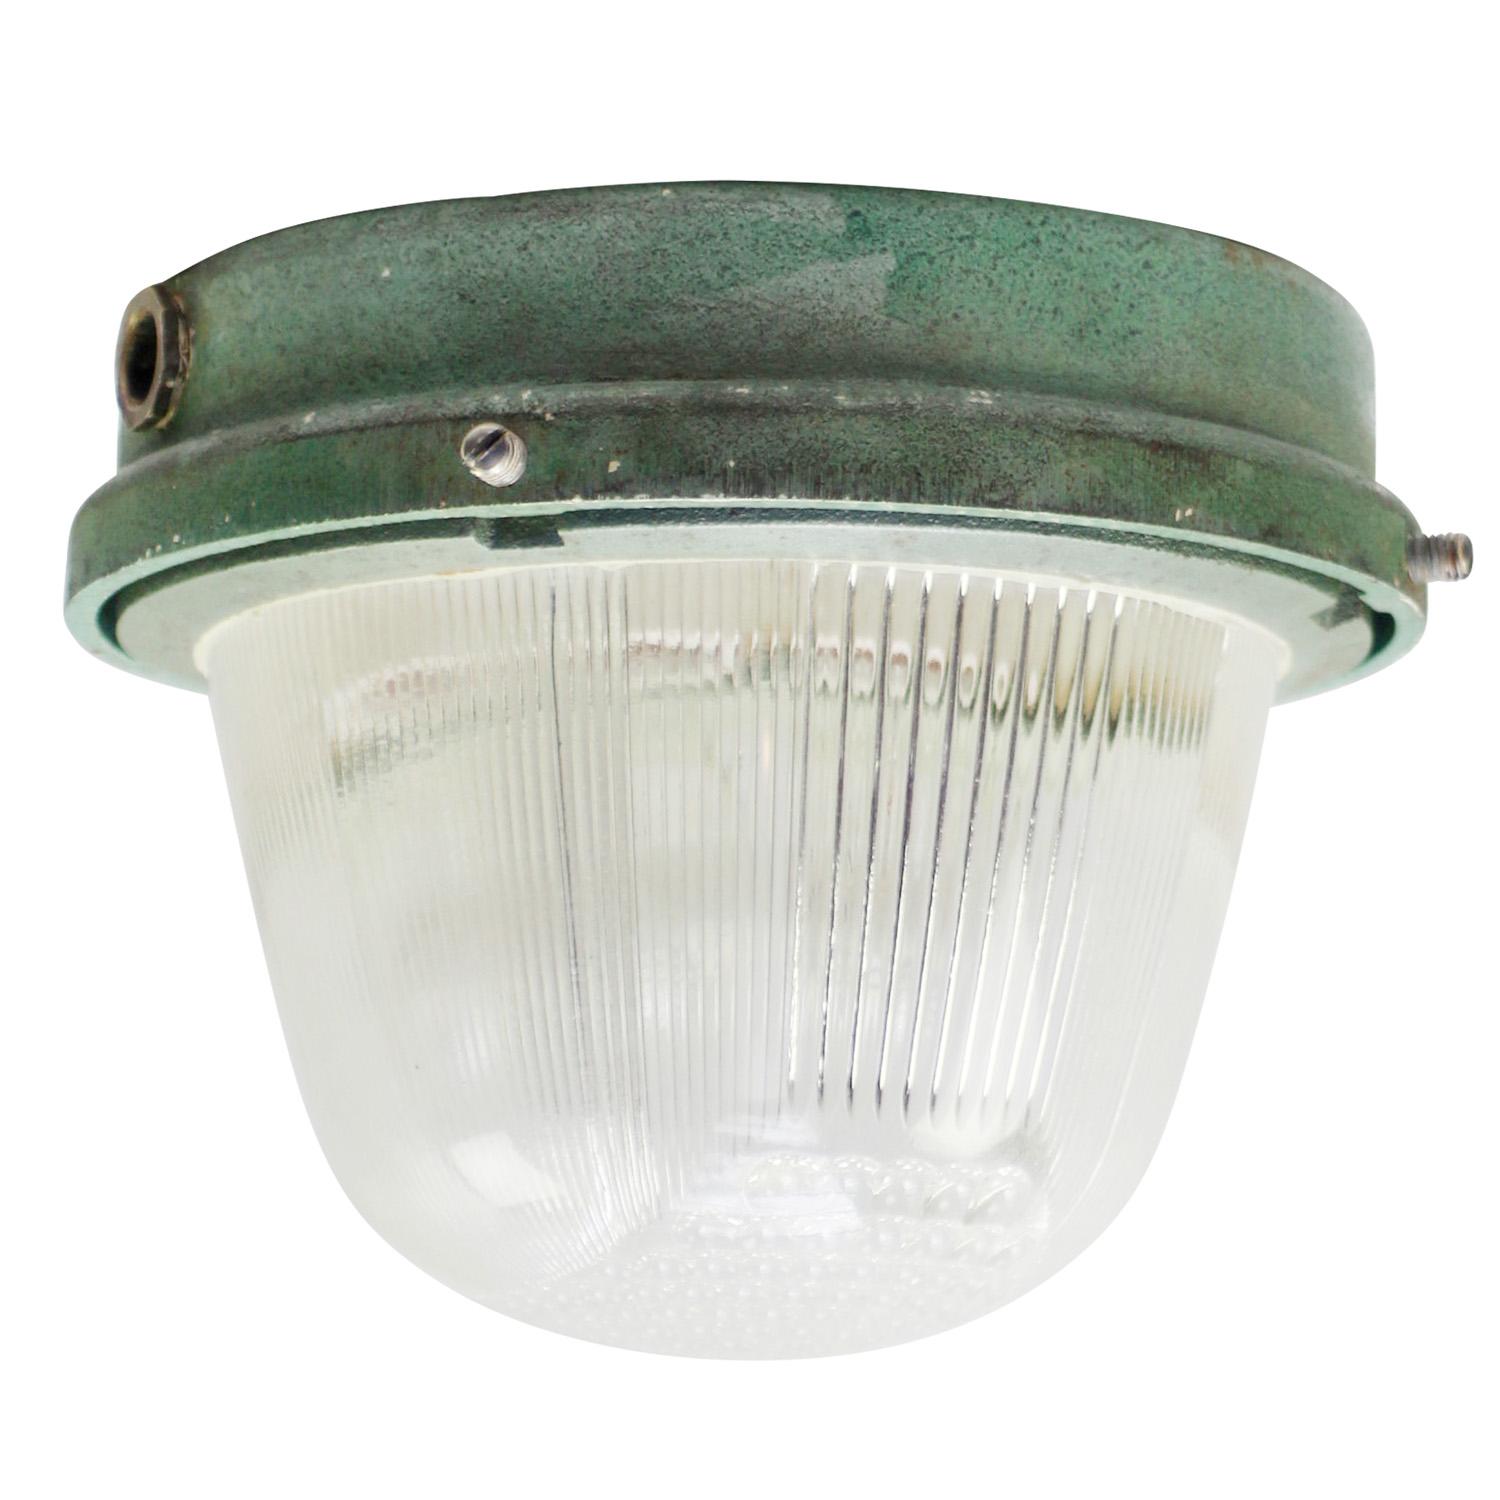 French Industrial wall / ceiling lamp by Holophane, France, model CE100
Green cast iron with clear cut glass.

Weight : 4.10 kg / 9 lb

Priced per individual item. All lamps have been made suitable by international standards for incandescent light